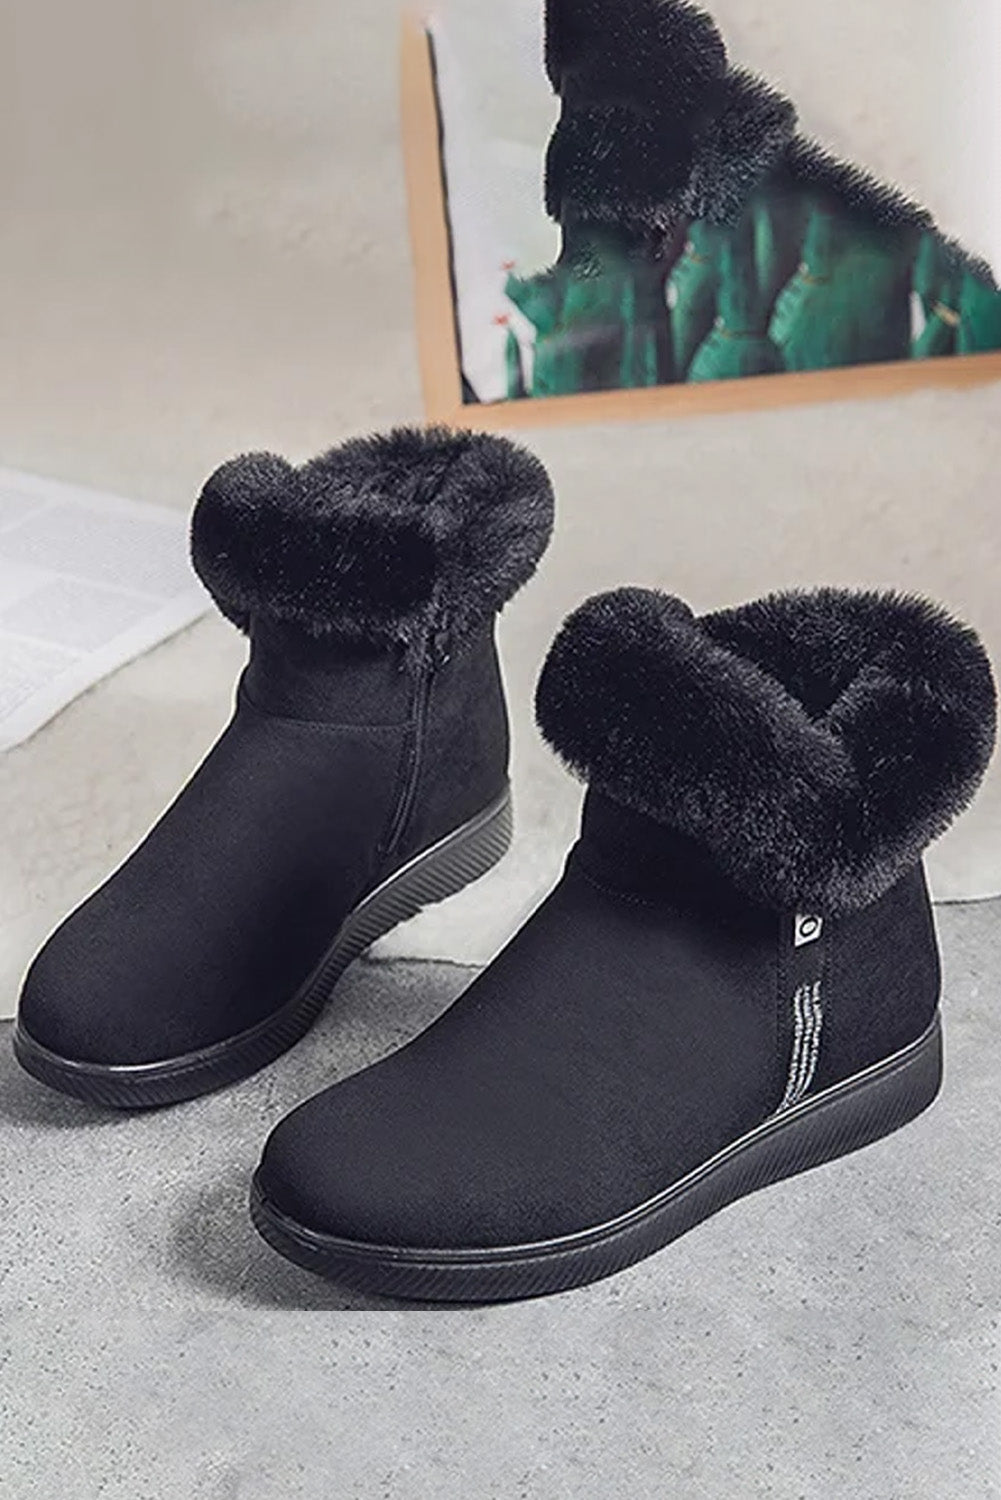 LC12457-2-37, LC12457-2-38, LC12457-2-41, Black Women’s Winter Warm Plush Boots Fur Lined Short Boot for Outdoor